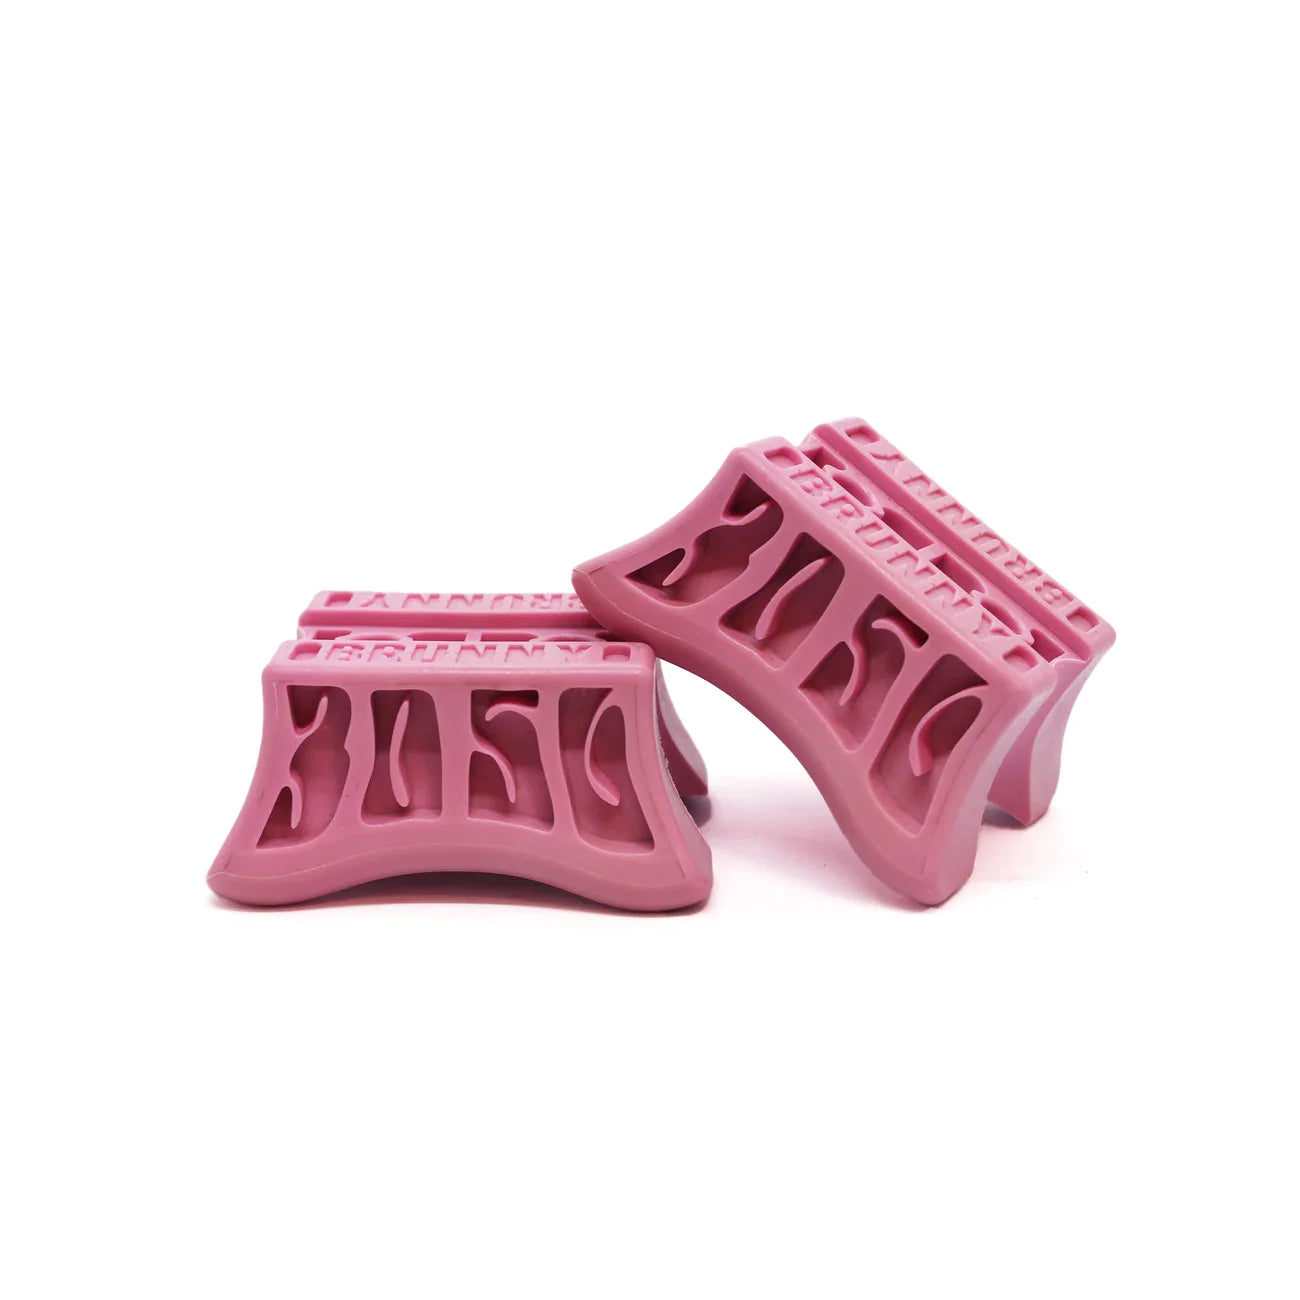 Come and get your Pink Brunny's Slide Blocks. These slide blocks are hotter than our Las Vegas summers. Stop by our Las Vegas, Downtown location or buy them online.